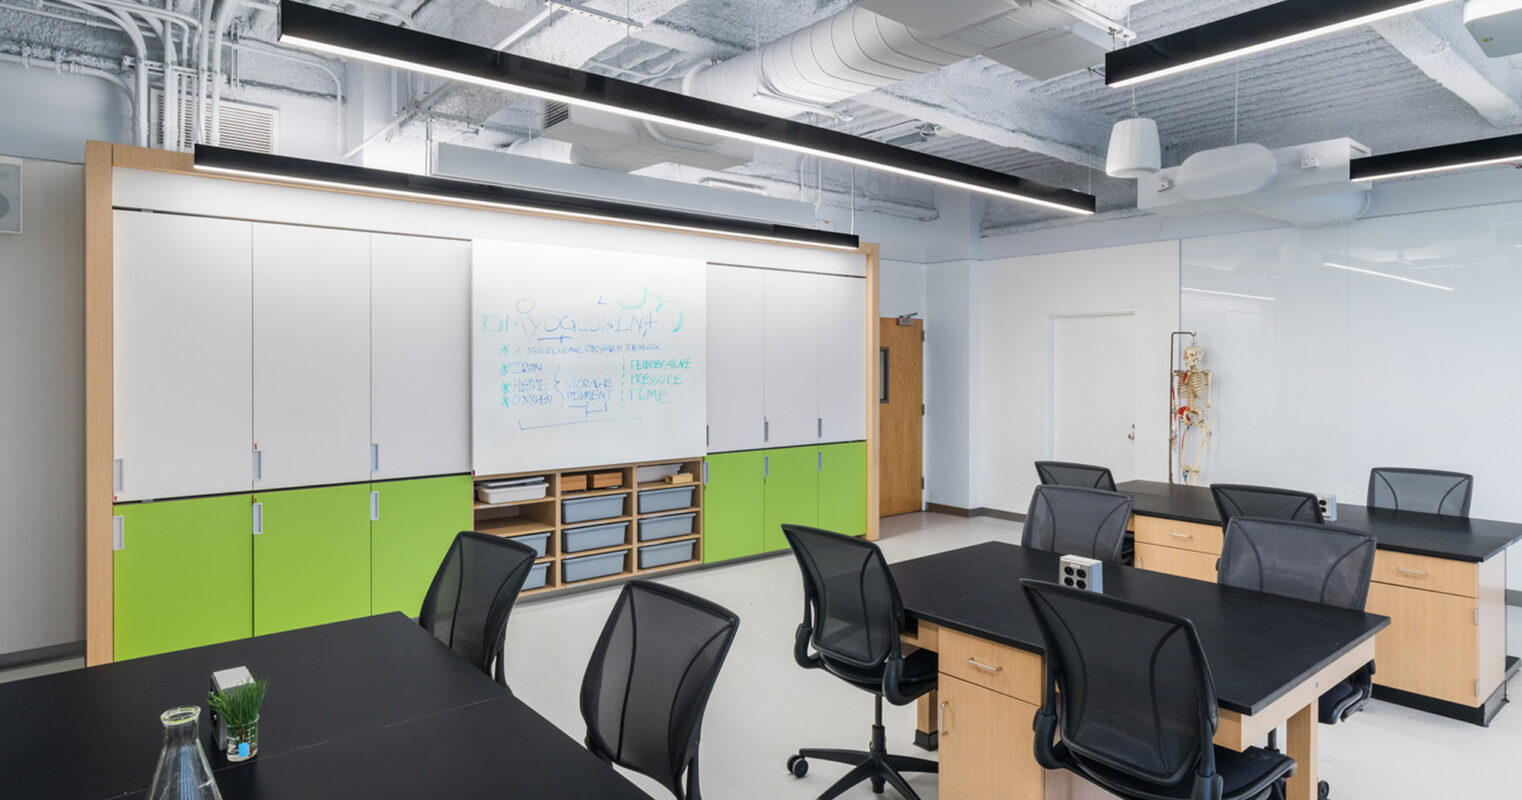 Modern office meeting area featuring exposed ceiling infrastructure, whiteboard cabinetry, black rolling chairs, dark tables, and vibrant green accents. Natural light enhances the space's airy feel and complements the minimalist design approach.